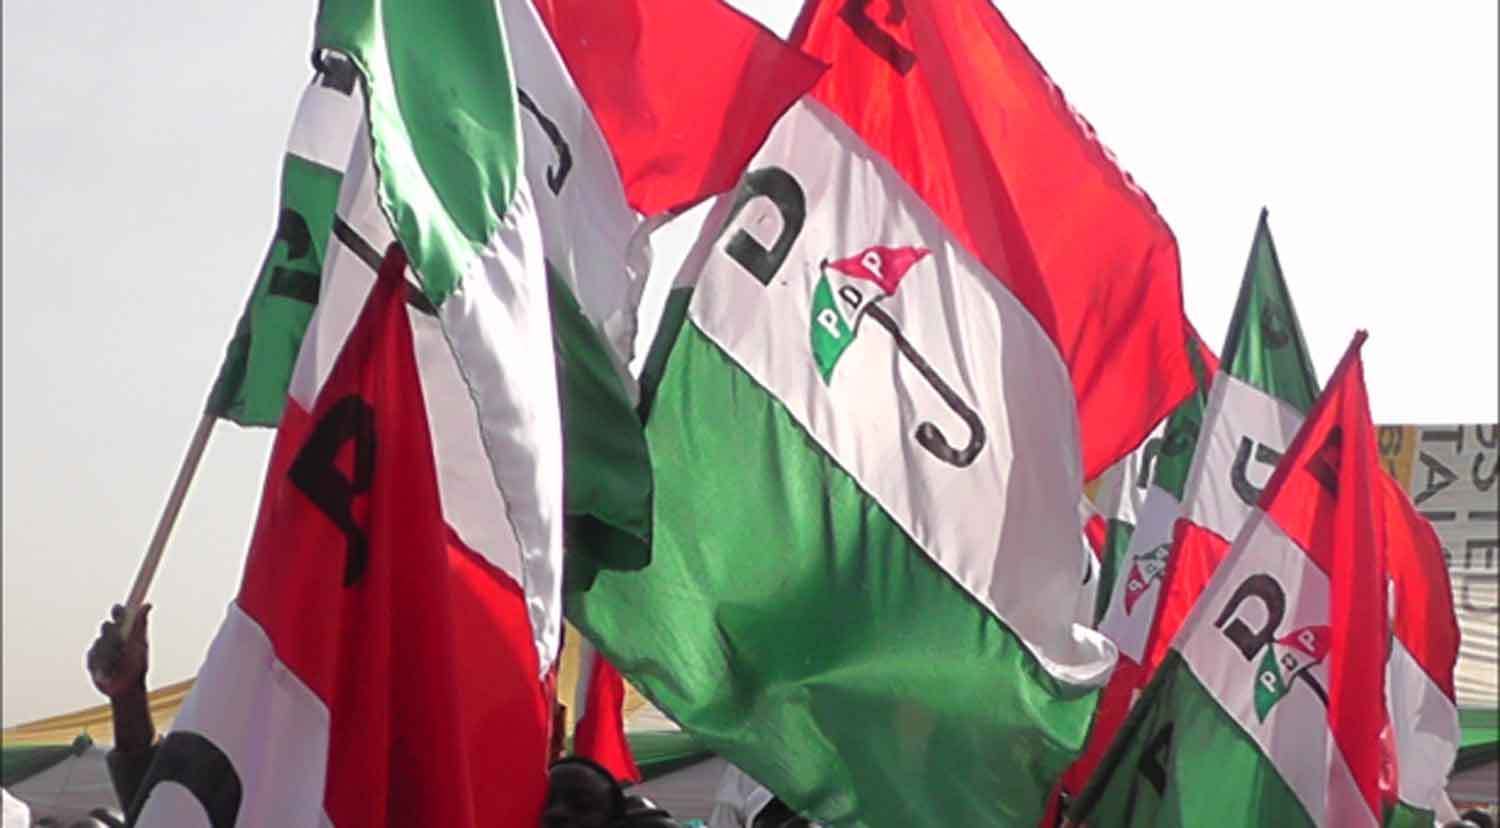 PDP House of reps primary for Ado/Okpokwu and Ogbadibo Federal Constituency postponed